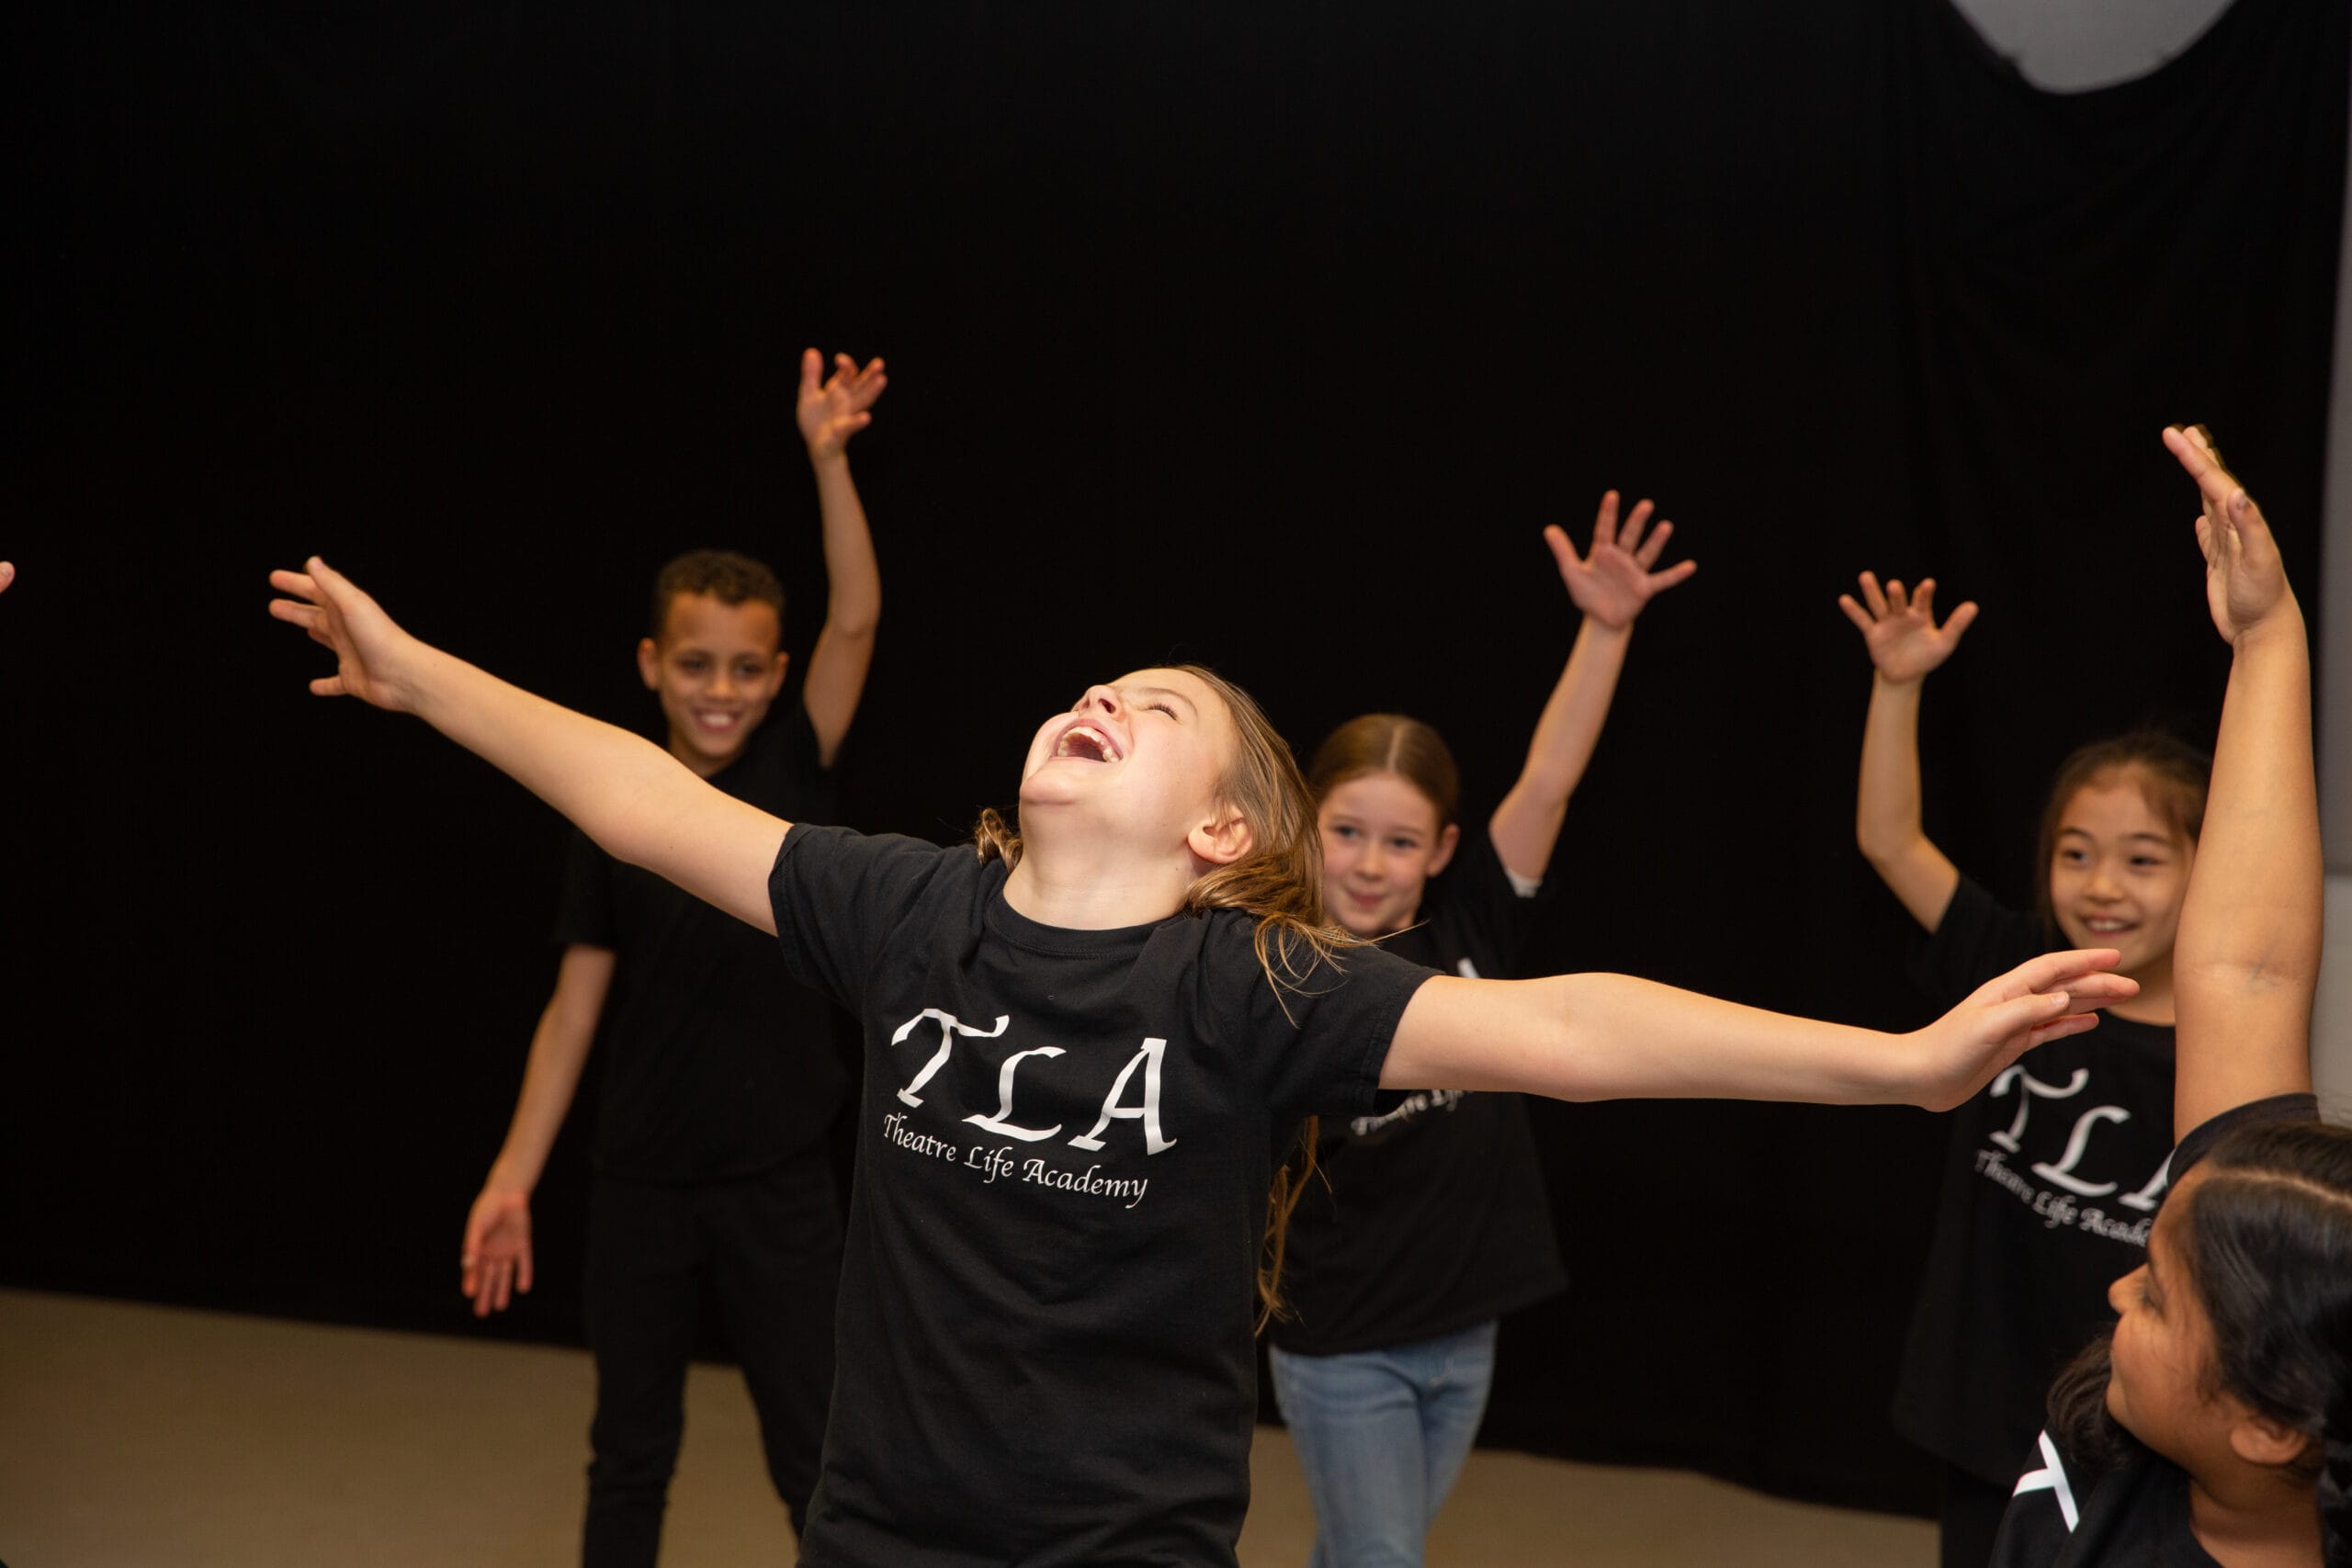 A young girl has her arms spread wide with a joyful expression as she engages in a dance class. Behind her, three other children are dancing happily with hands in the air.